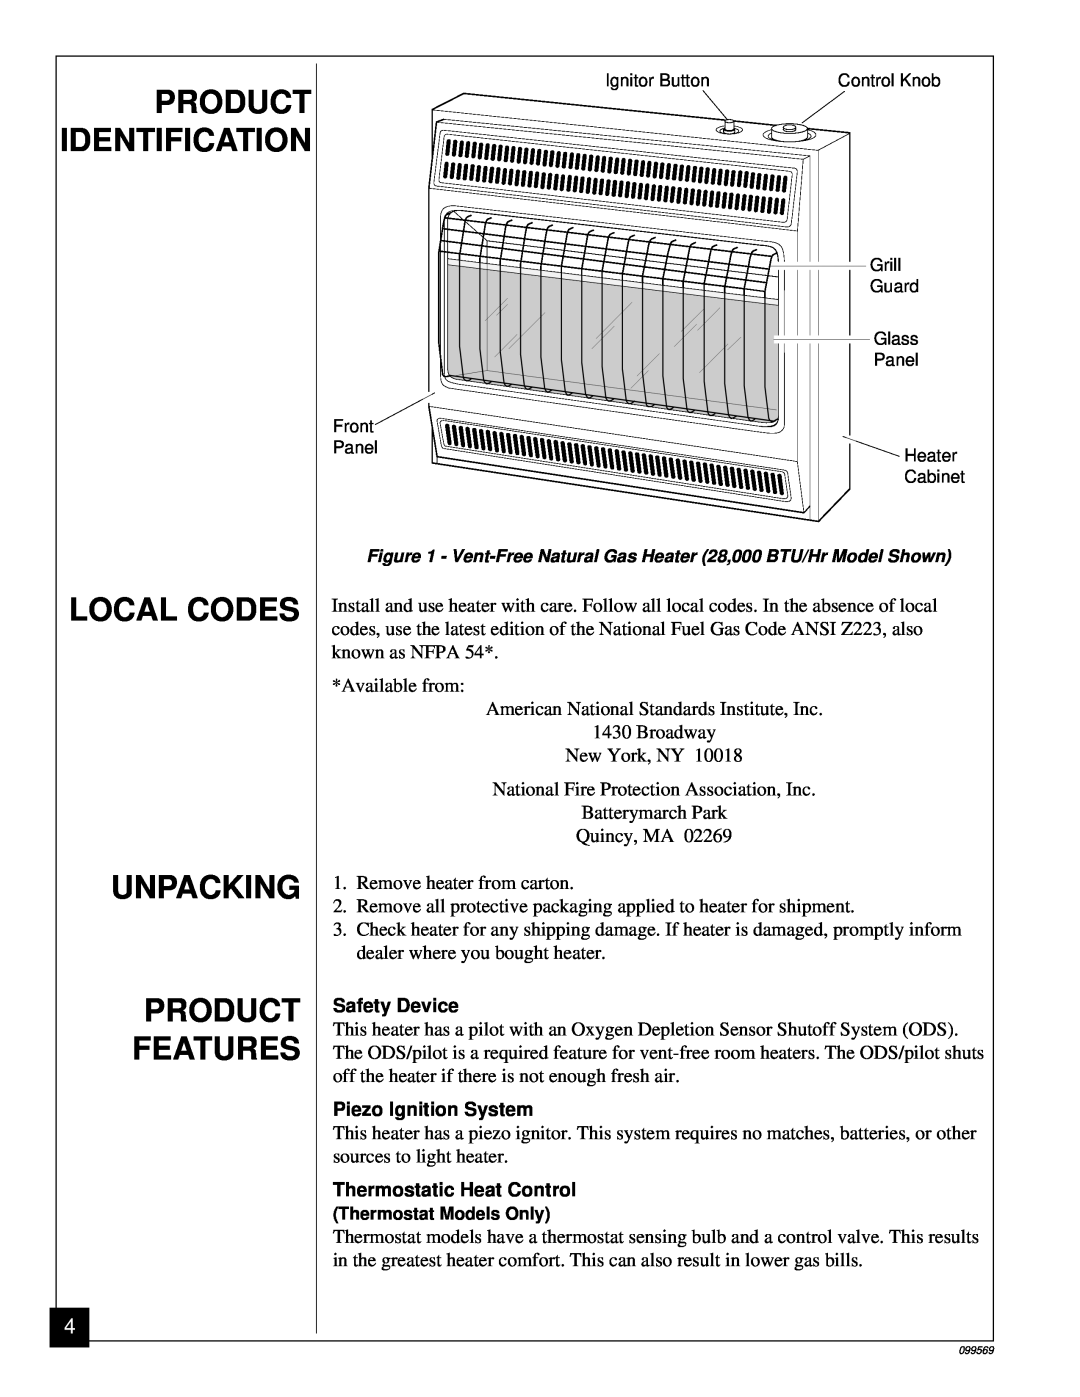 Desa A installation manual Product Identification, Local Codes, Unpacking, Features, Safety Device, Piezo Ignition System 